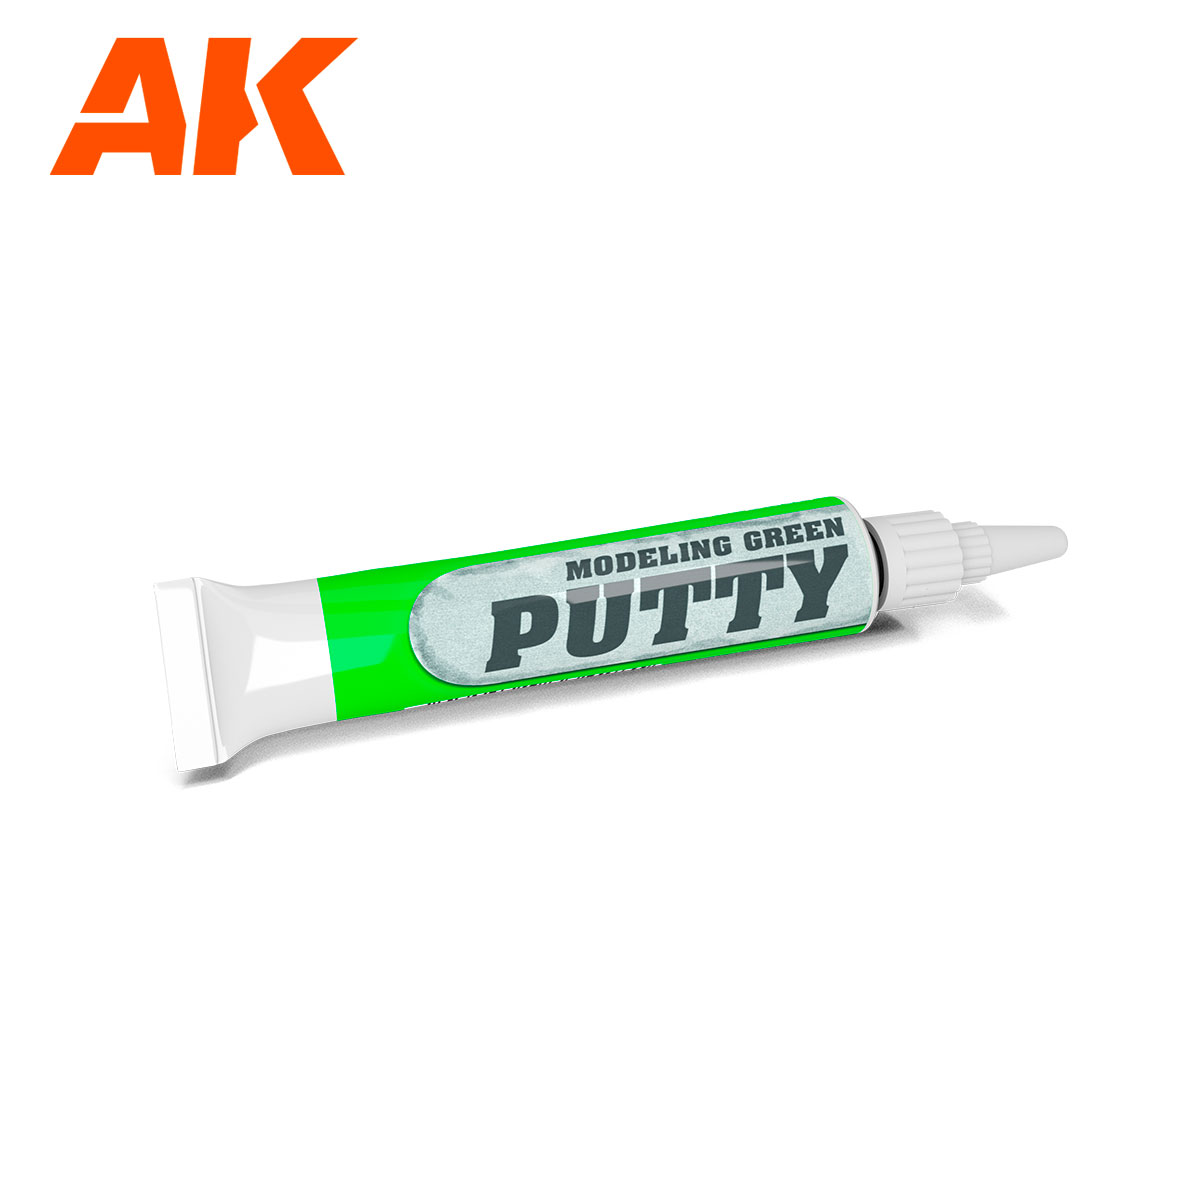 Buy MODELING GREEN PUTTY online for 4,75€